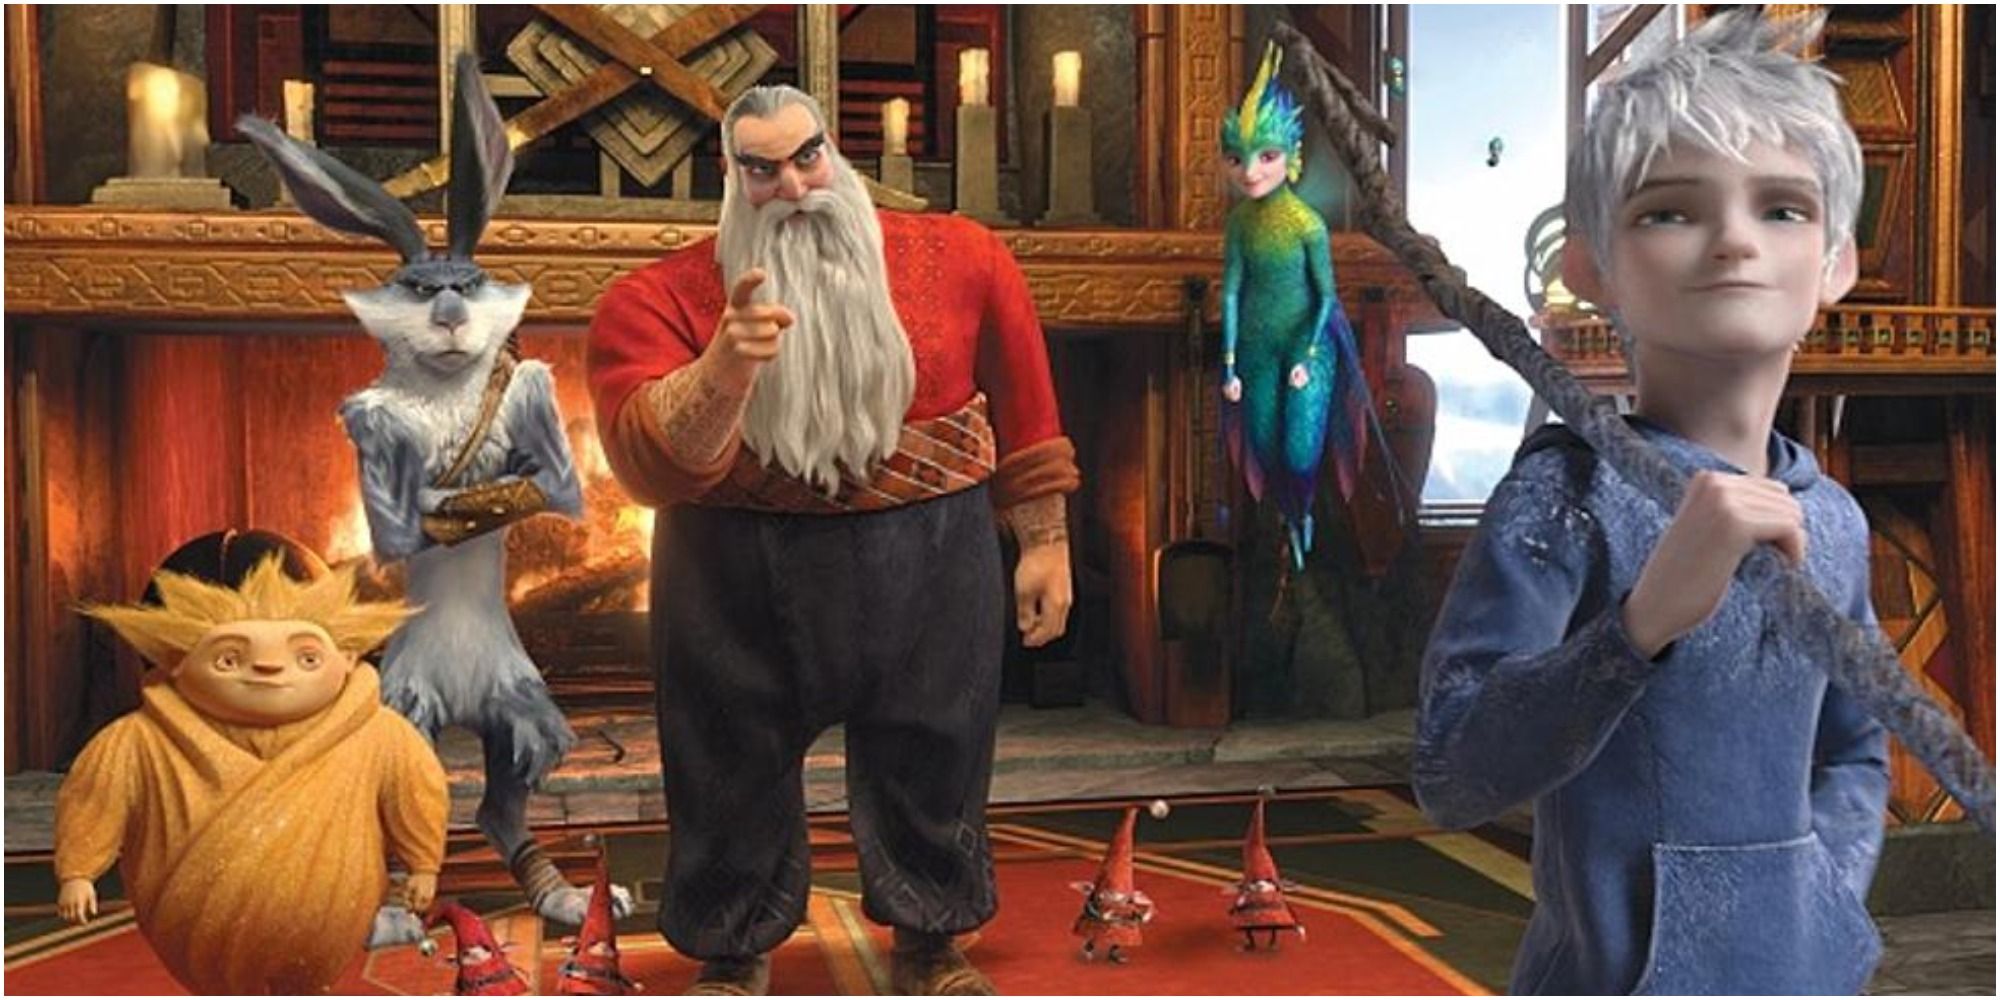 The characters of DreamWorks' Rise of the Guardians 